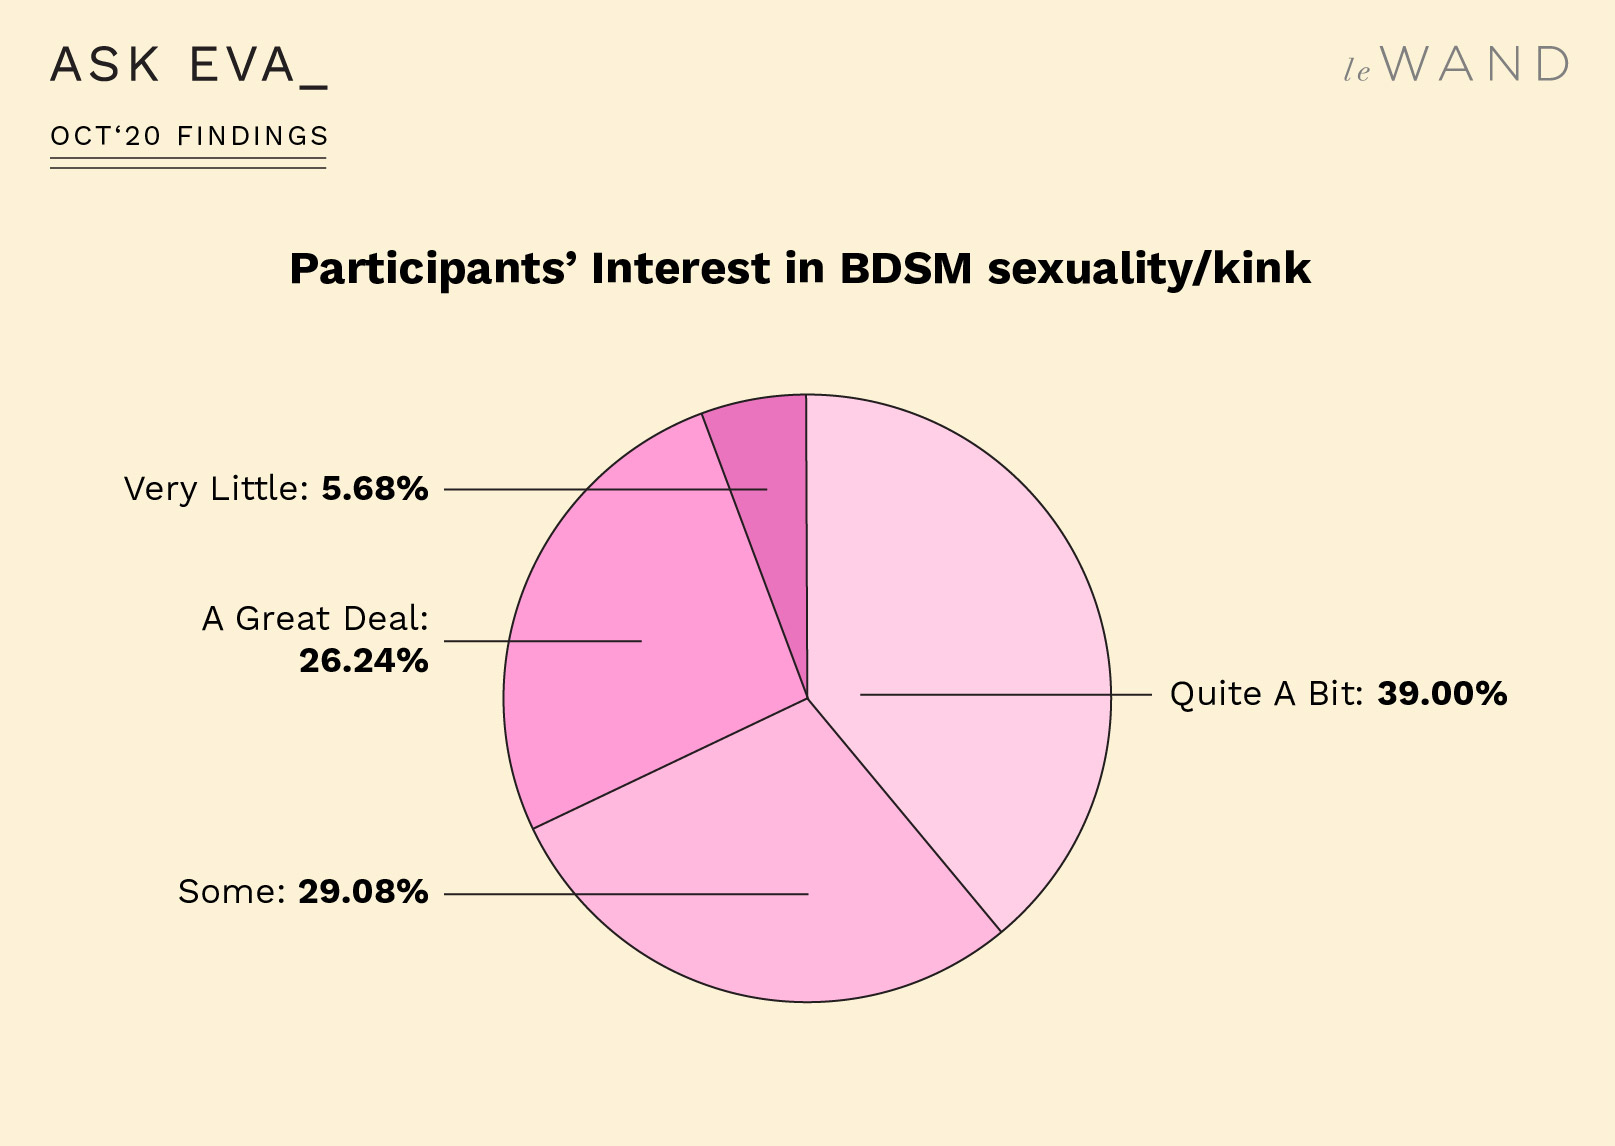 Ask Eva October Survey Findings on BDSM and Kink